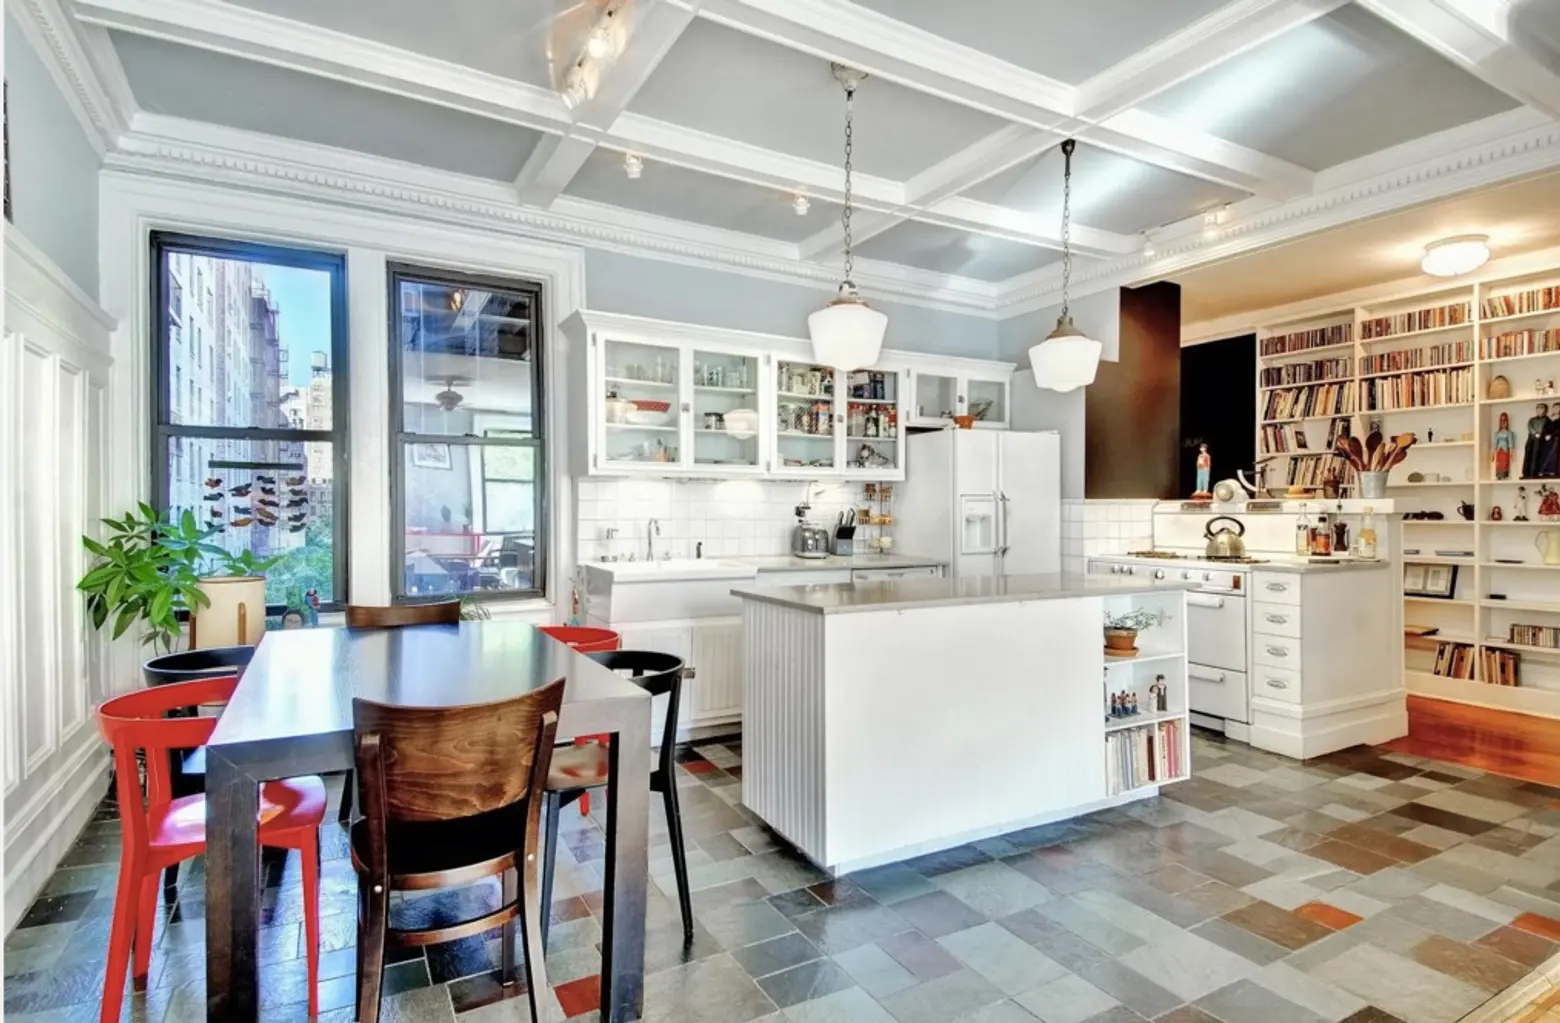 Bright and Breezy Three Bedroom Asks $1.4M in Morningside Heights